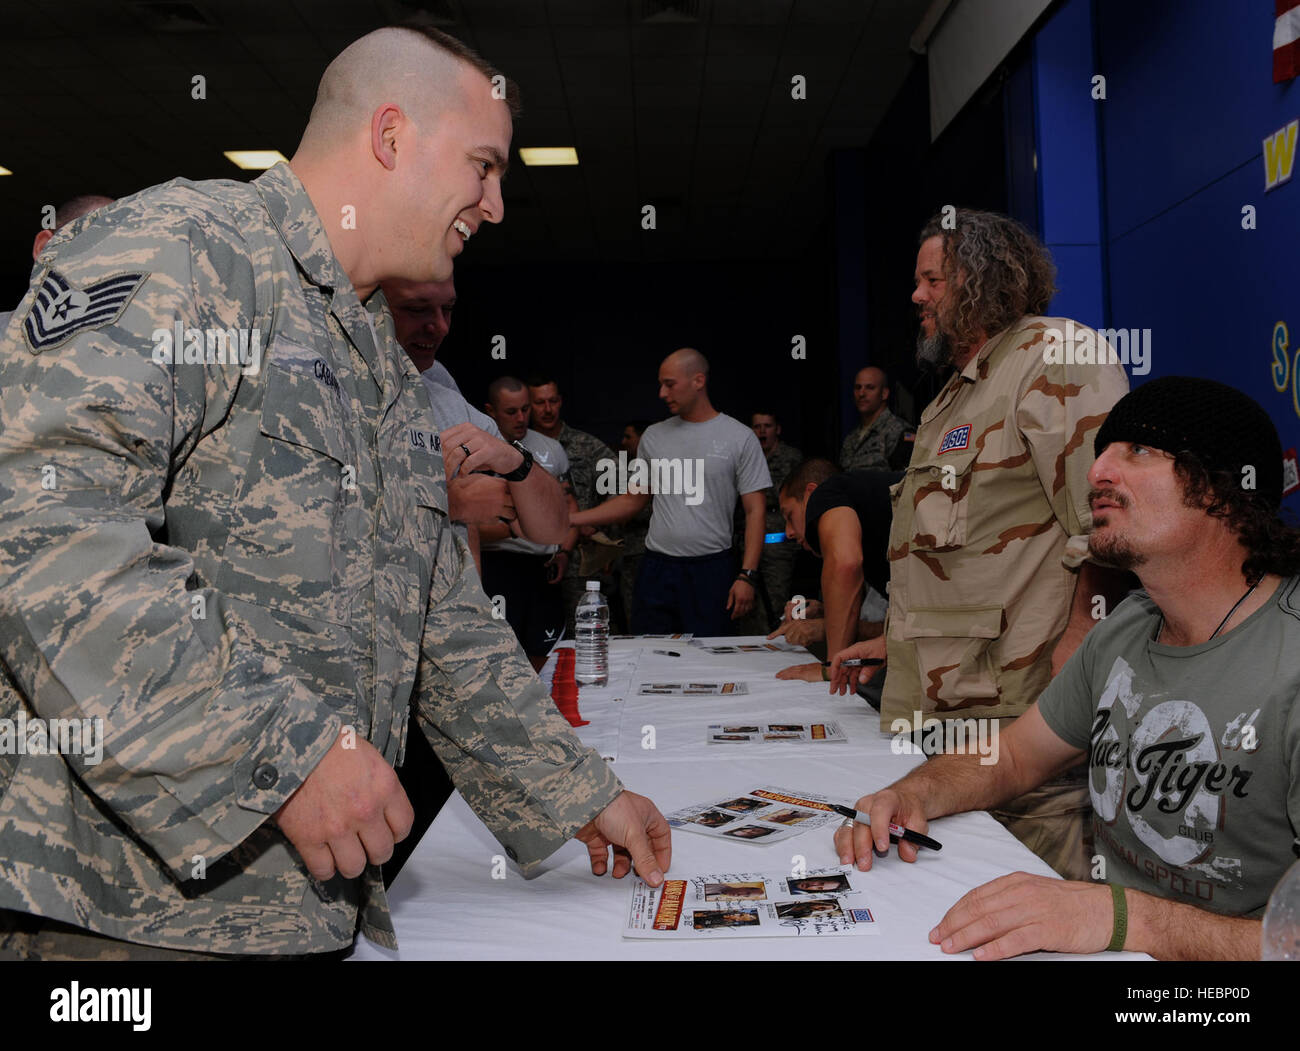 Tech. Sgt. Chris Cabano, an expediter with the 332nd Expeditionary Aircraft Maintenance Squadron, gets an autograph from Kim Coates, a cast member of Sons of Anarchy at a meet and greet event at Joint Base Balad, Iraq, March 15, 2010. Four cast members from the hit television show are touring bases throughout Southwest Asia to show their appreciation and provide a morale boost for deployed personnel. TSgt Cabano is deployed from Shaw Air Force Base, S.C. and is a native of Cabool, MS. (U.S. Air Force photo by Master Sgt. Linda C. Miller/Released) Stock Photo